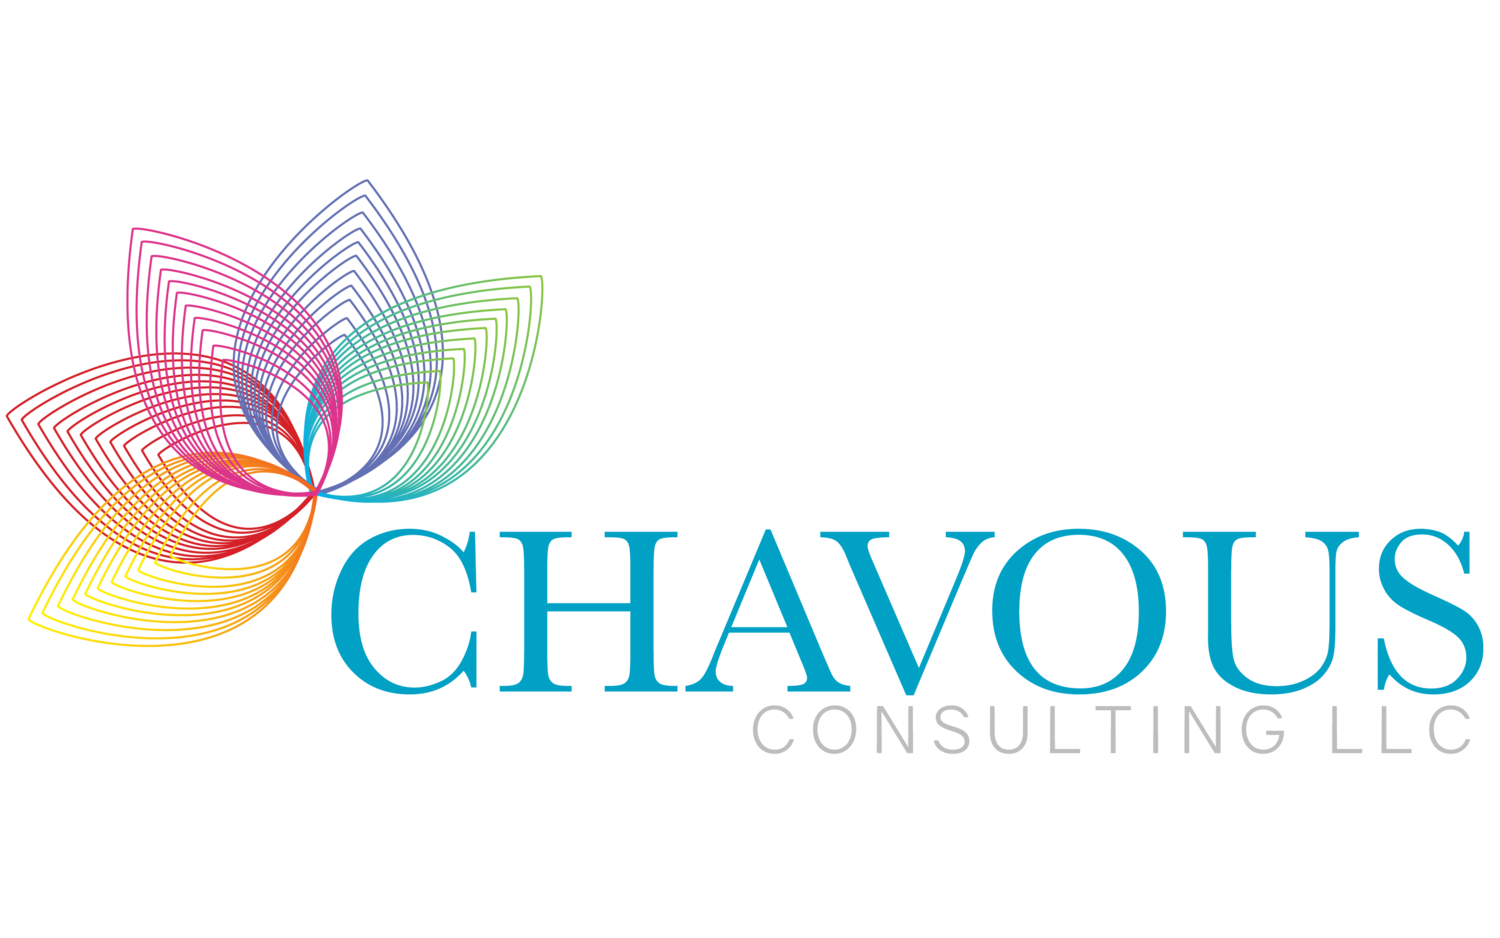 Chavous Consulting